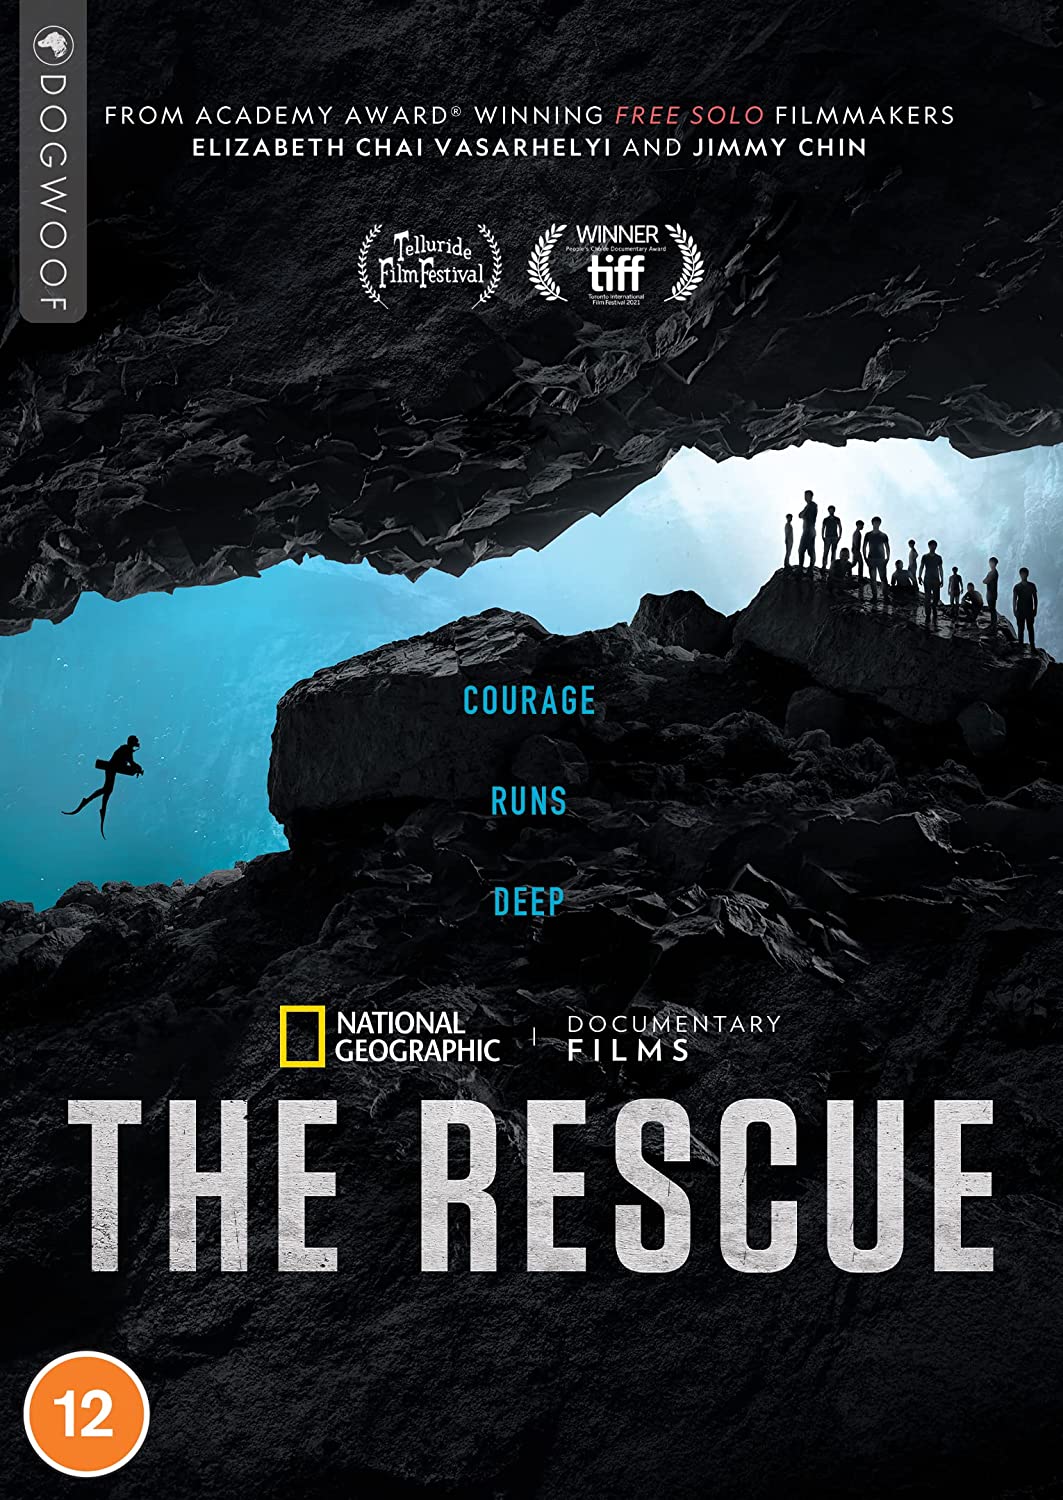 The Rescue  [2021] - Documentary [[DVD]]